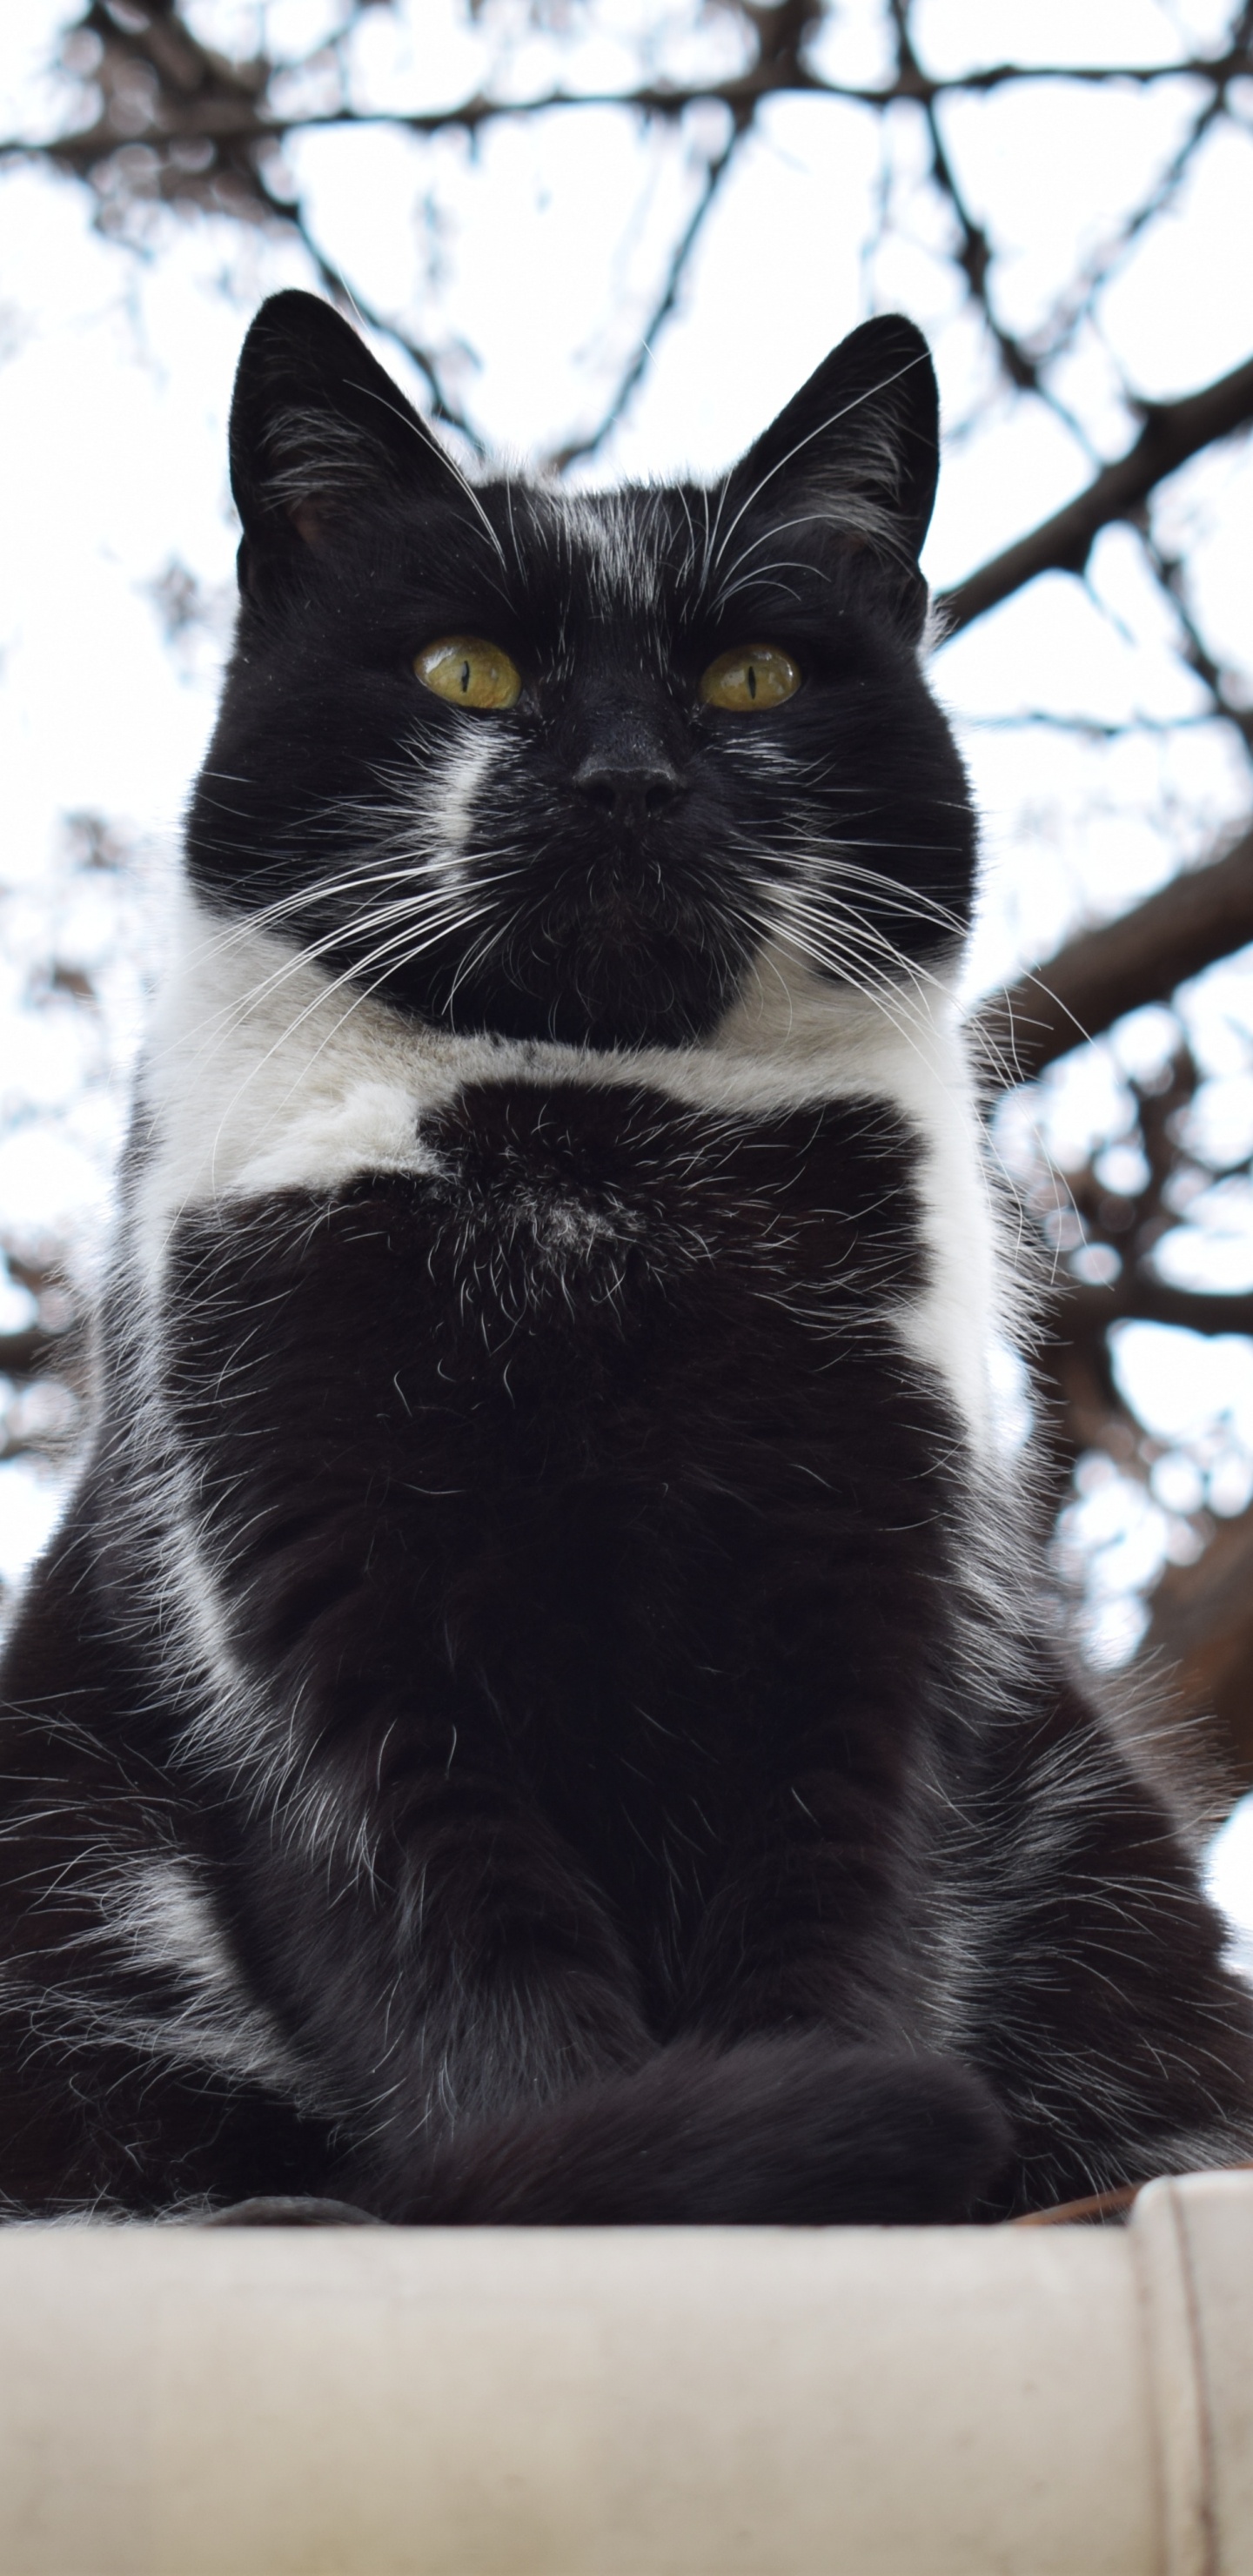 Tuxedo Cat on Brown Wooden Fence During Daytime. Wallpaper in 1440x2960 Resolution